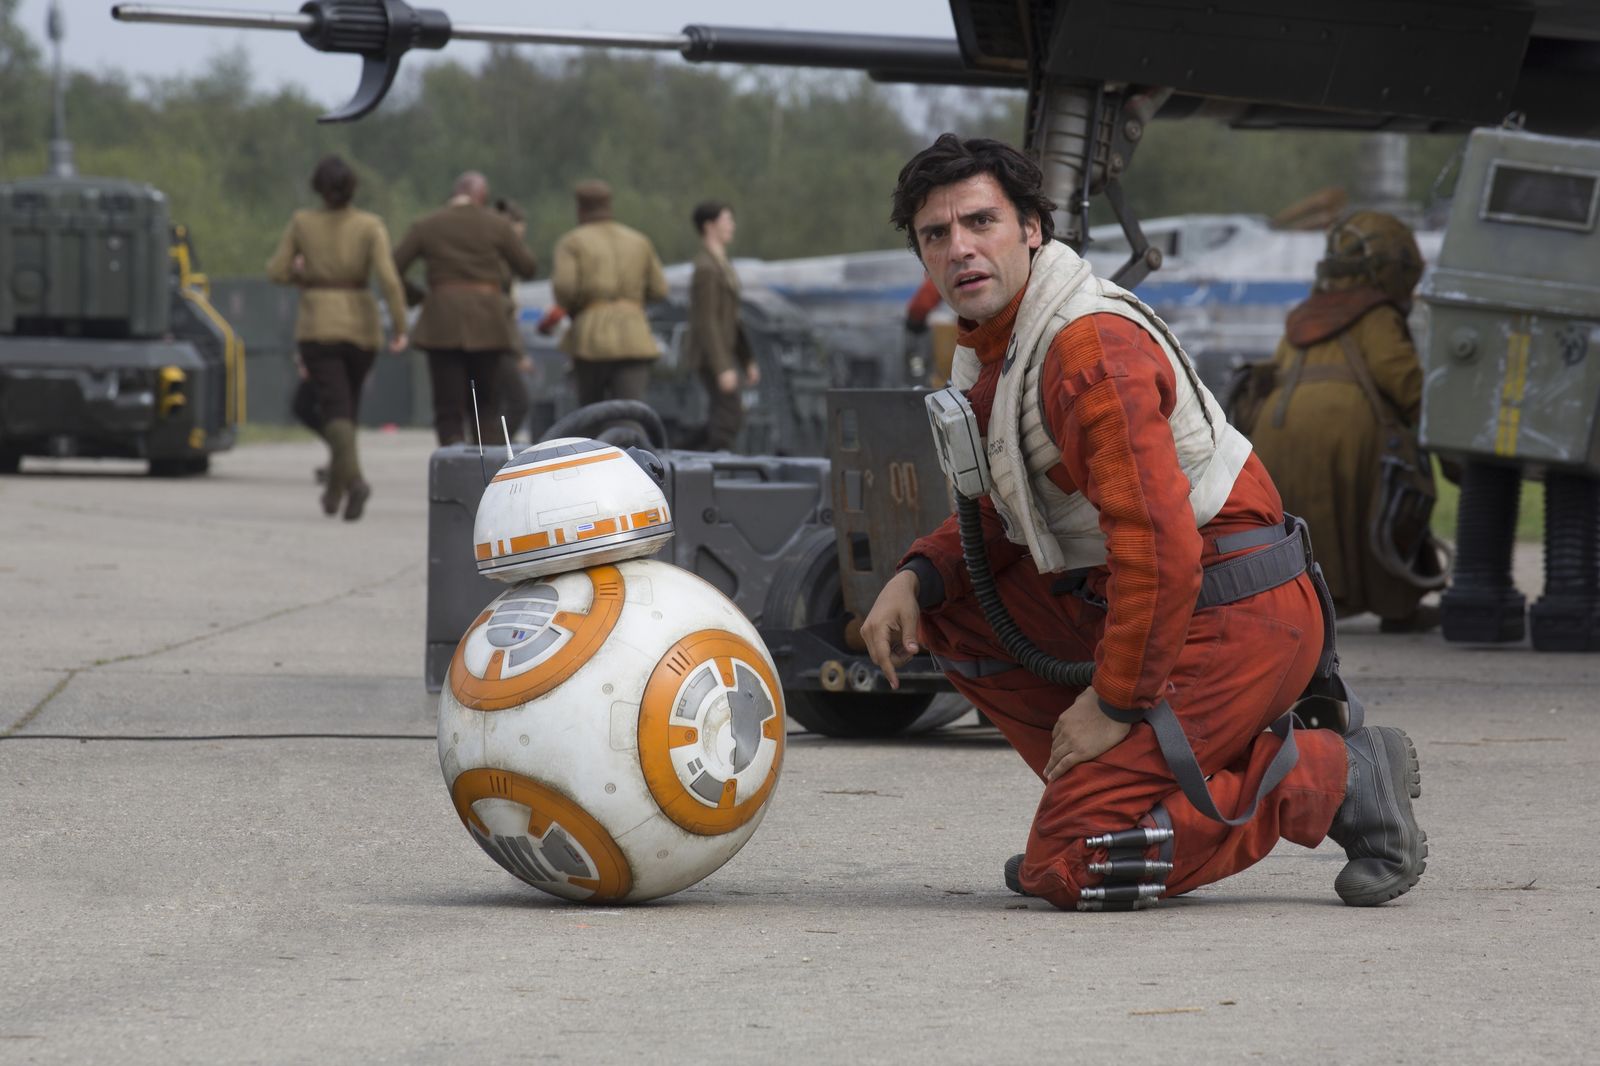 Poe Dameron (Oscar Isaac) is an ace pilot in the Resistance.